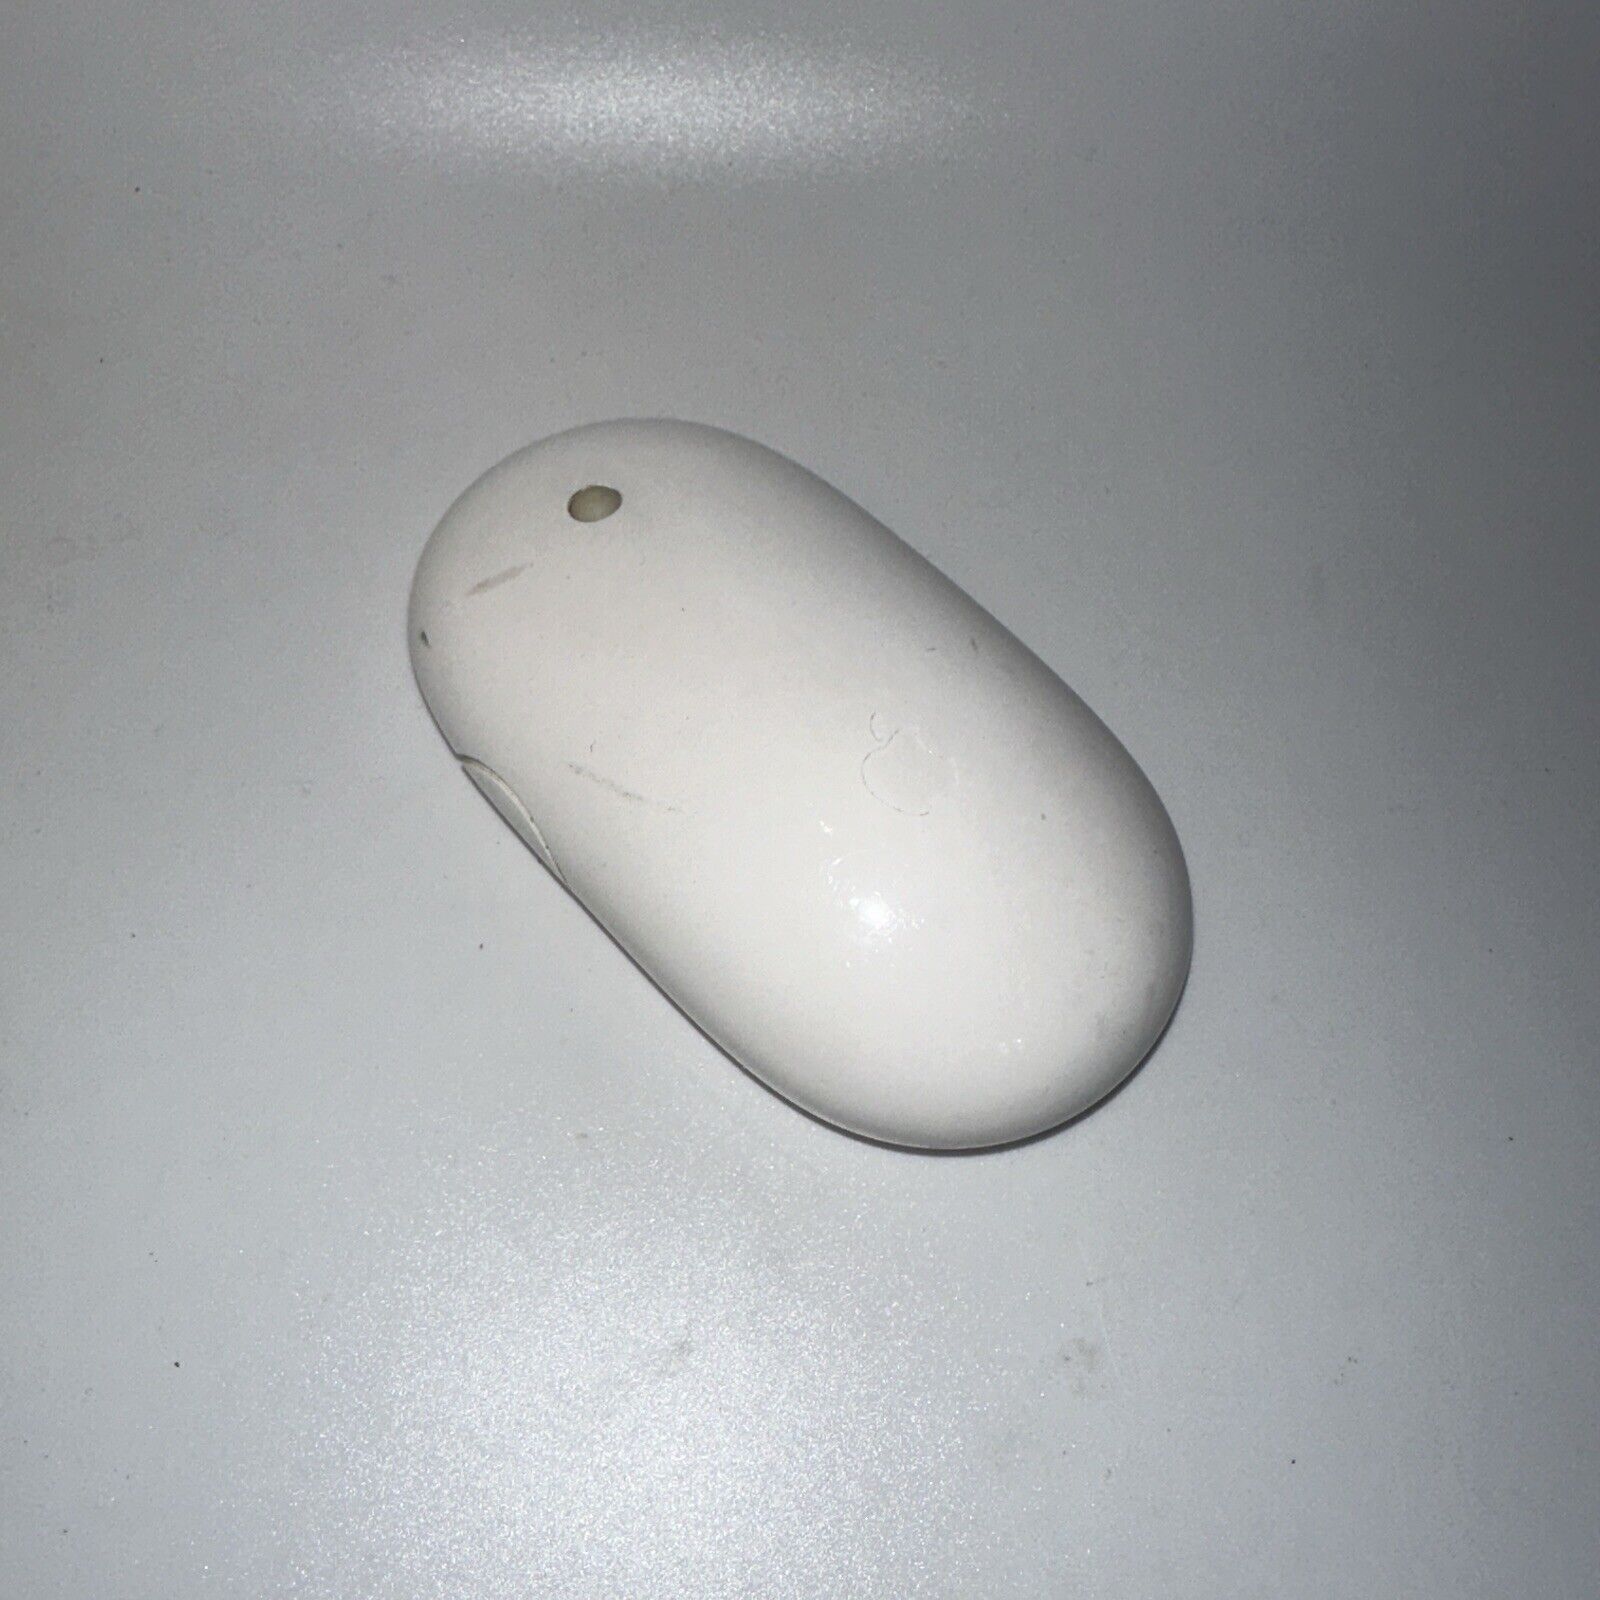 Genuine Apple Wireless Bluetooth Mouse A1197 White Tested